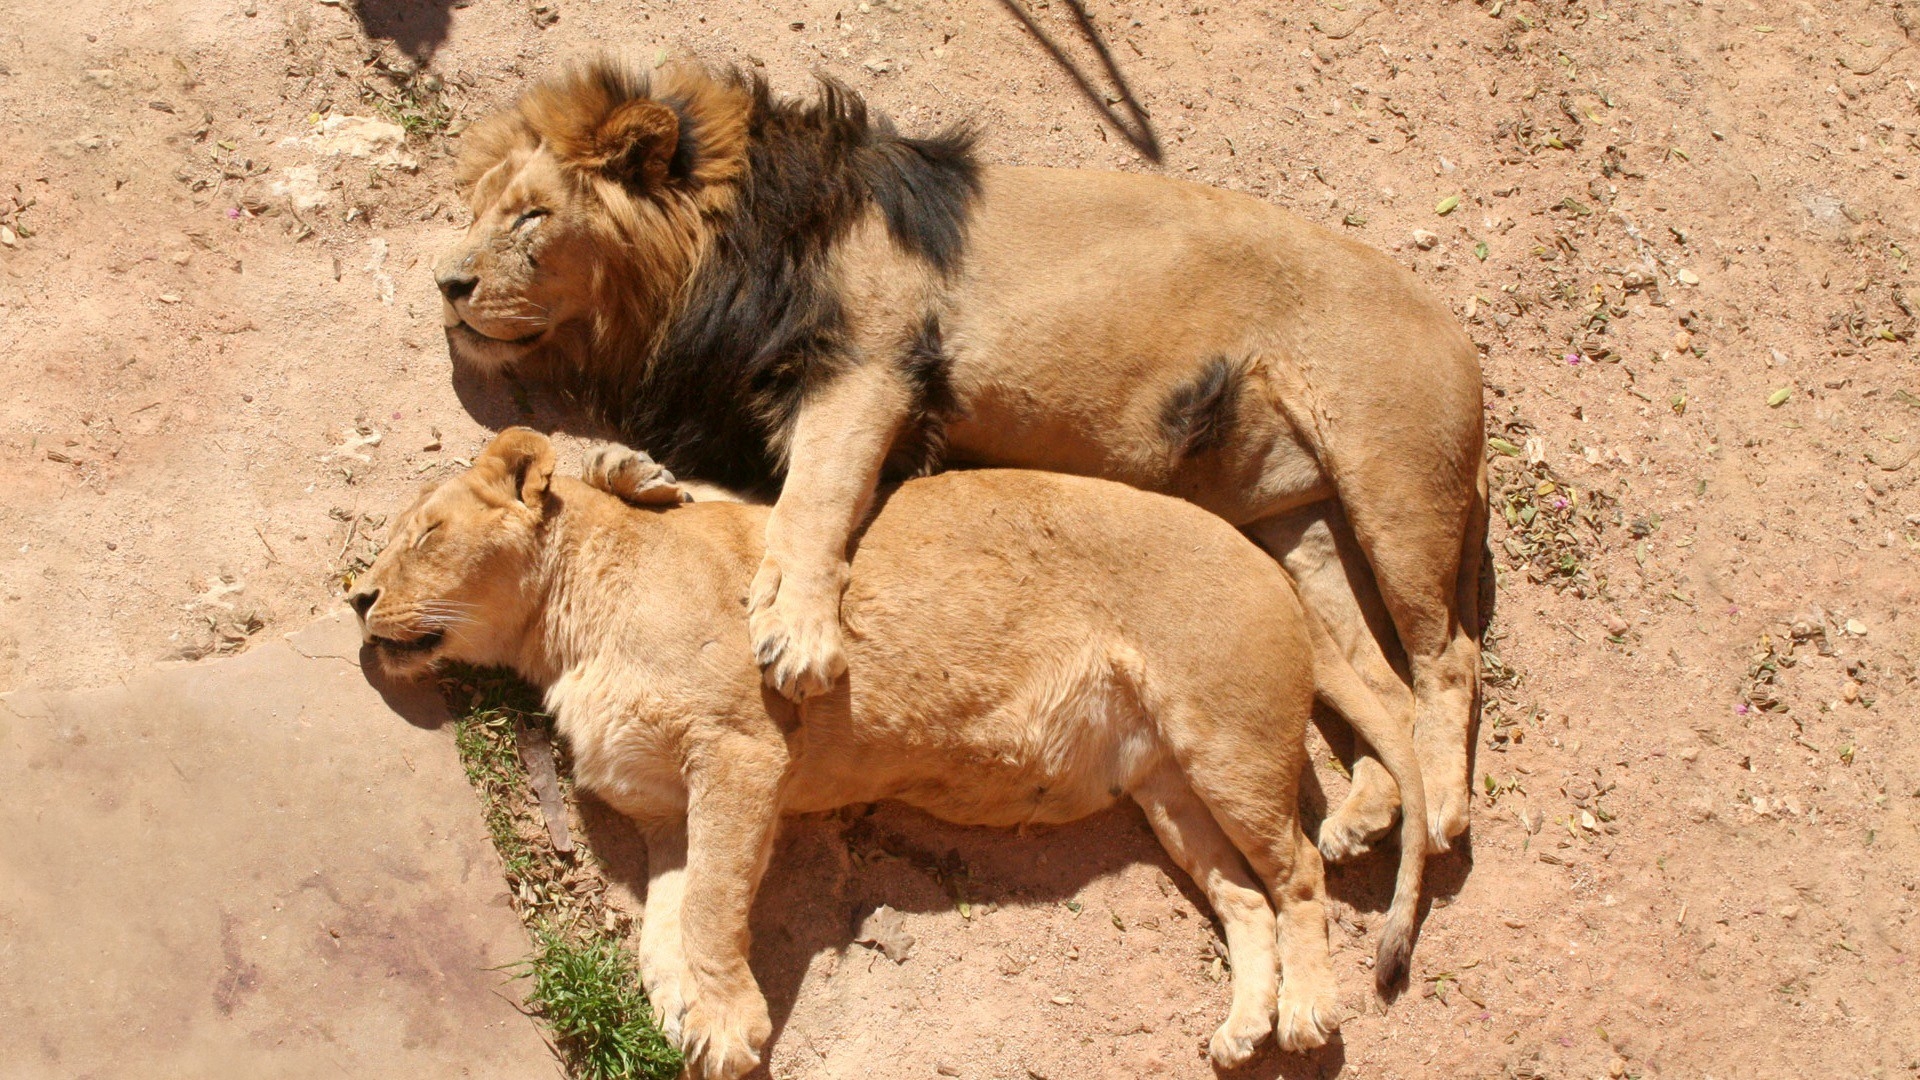 Download Wallpaper 1920x1080 lions, couple, lioness, lion, sleeping ...